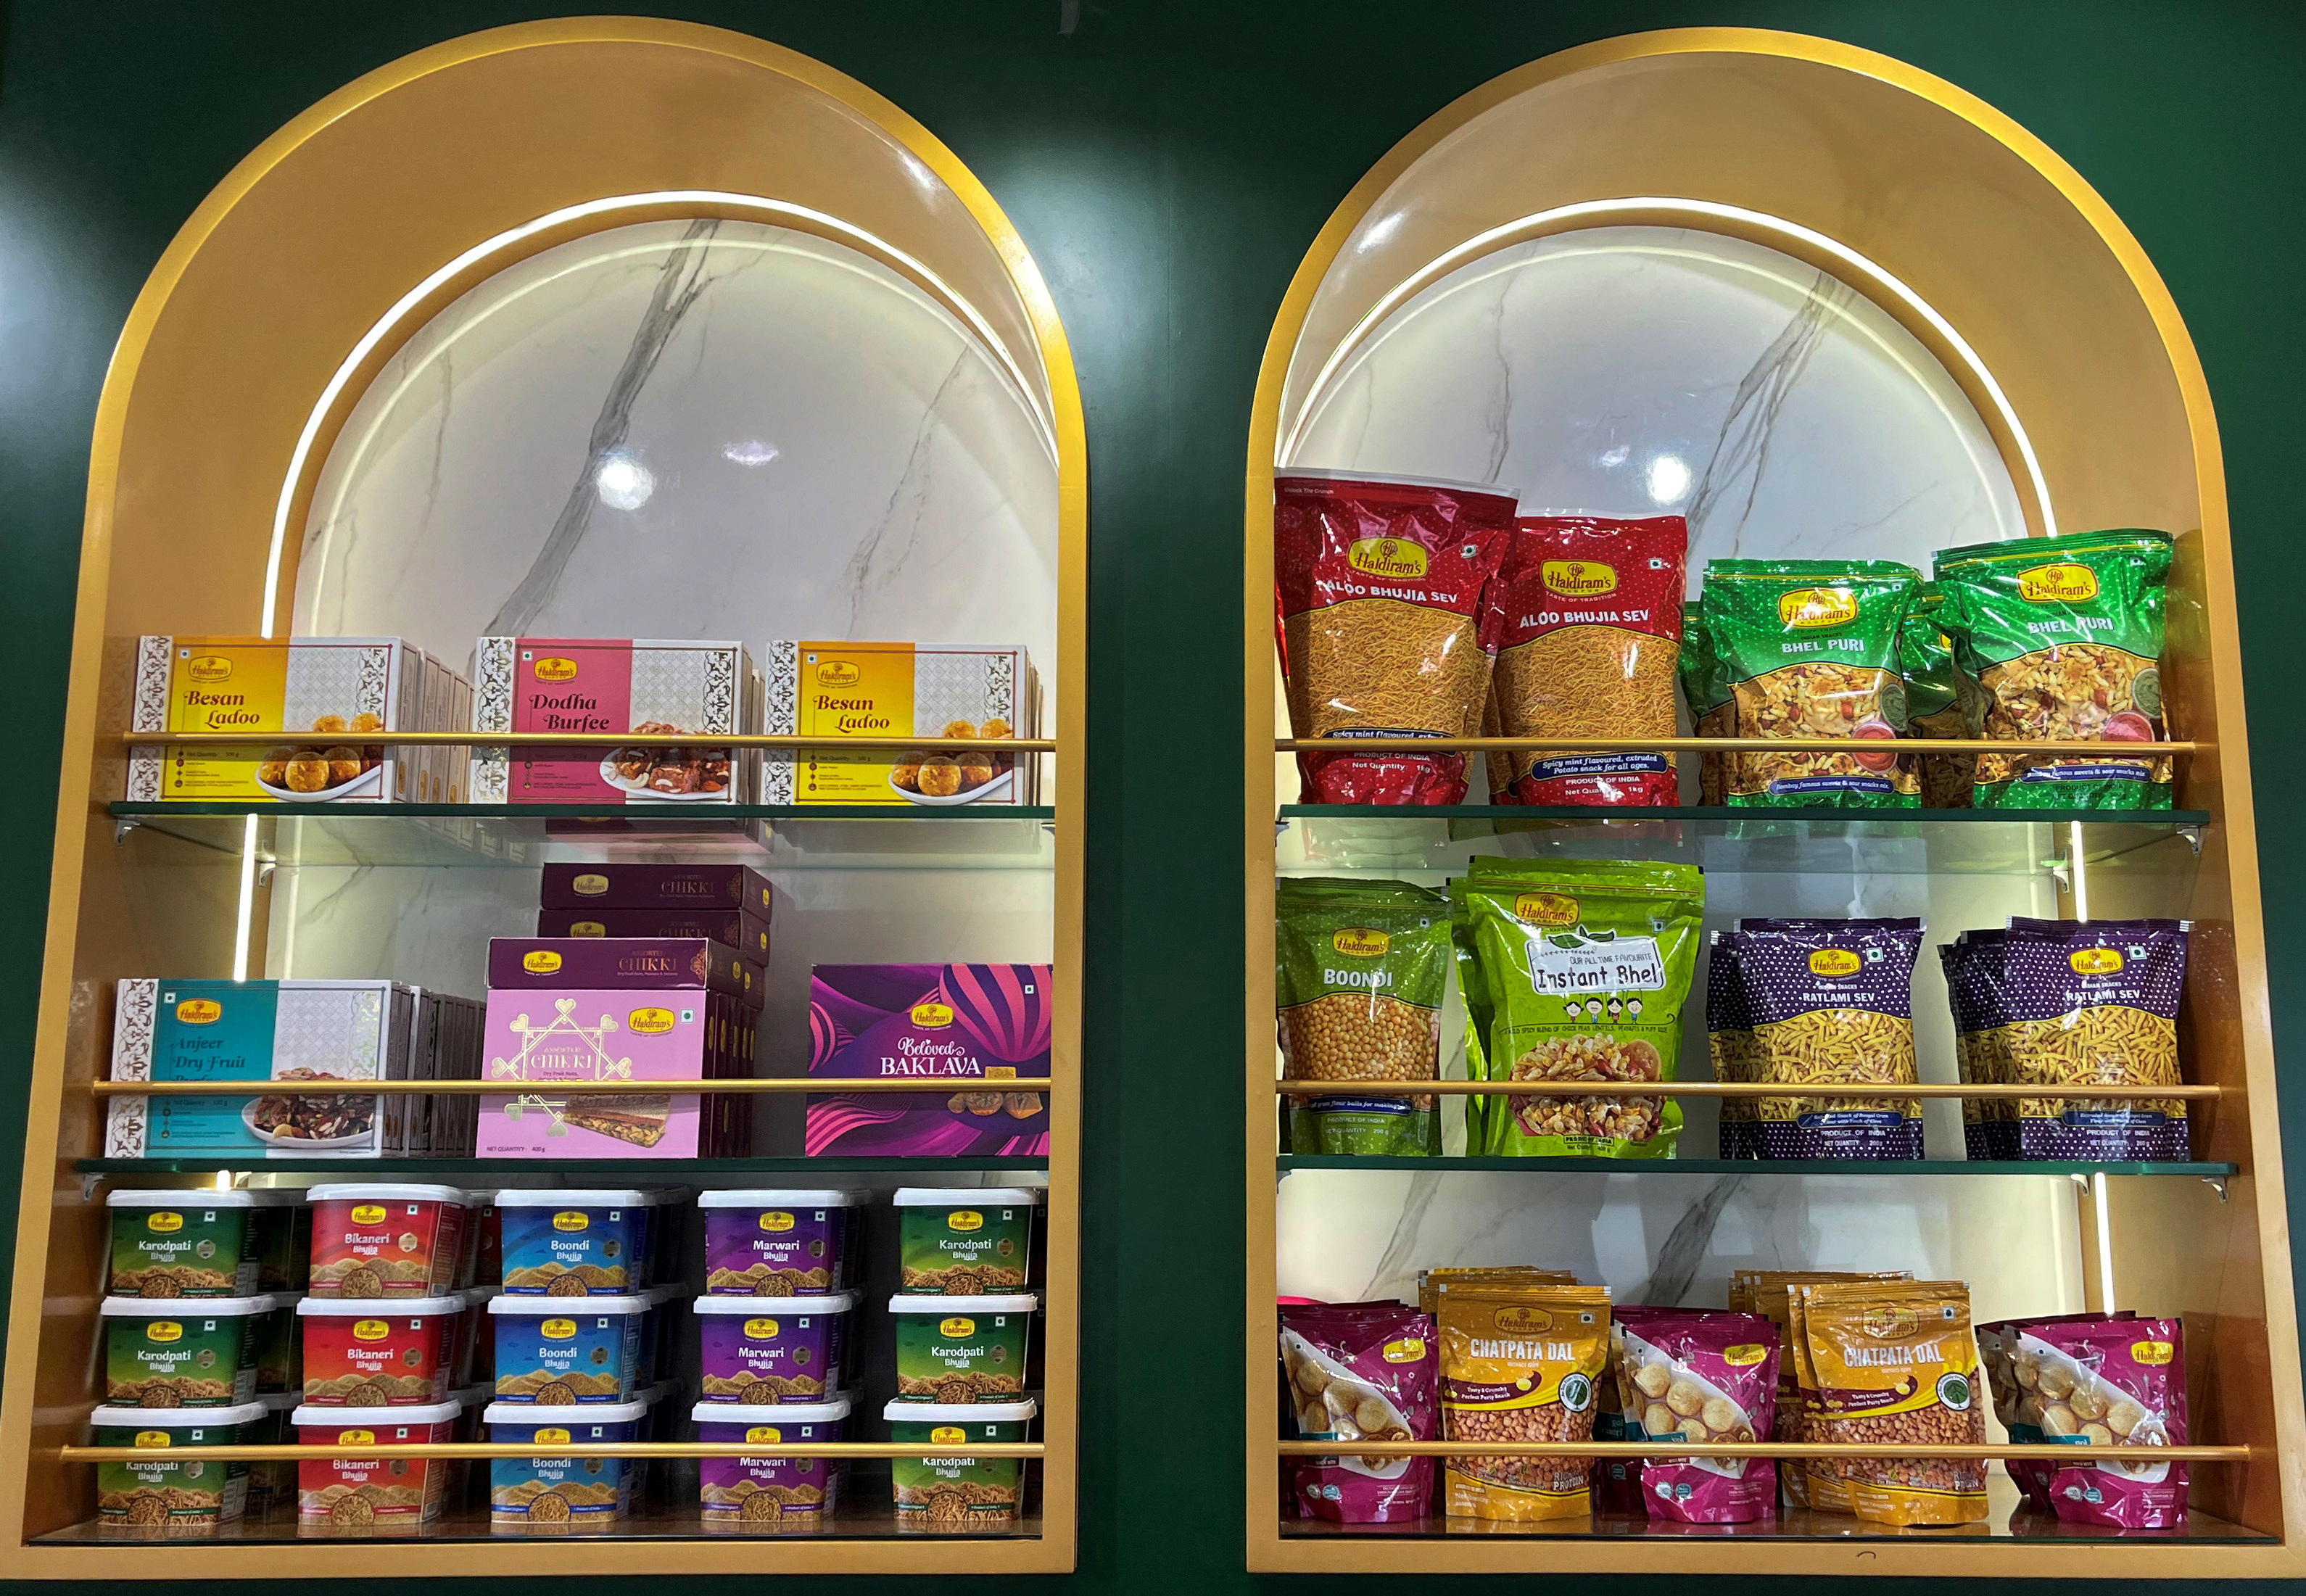 A view shows packets of snacks on shelves inside a Haldiram's restaurant in Mumbai